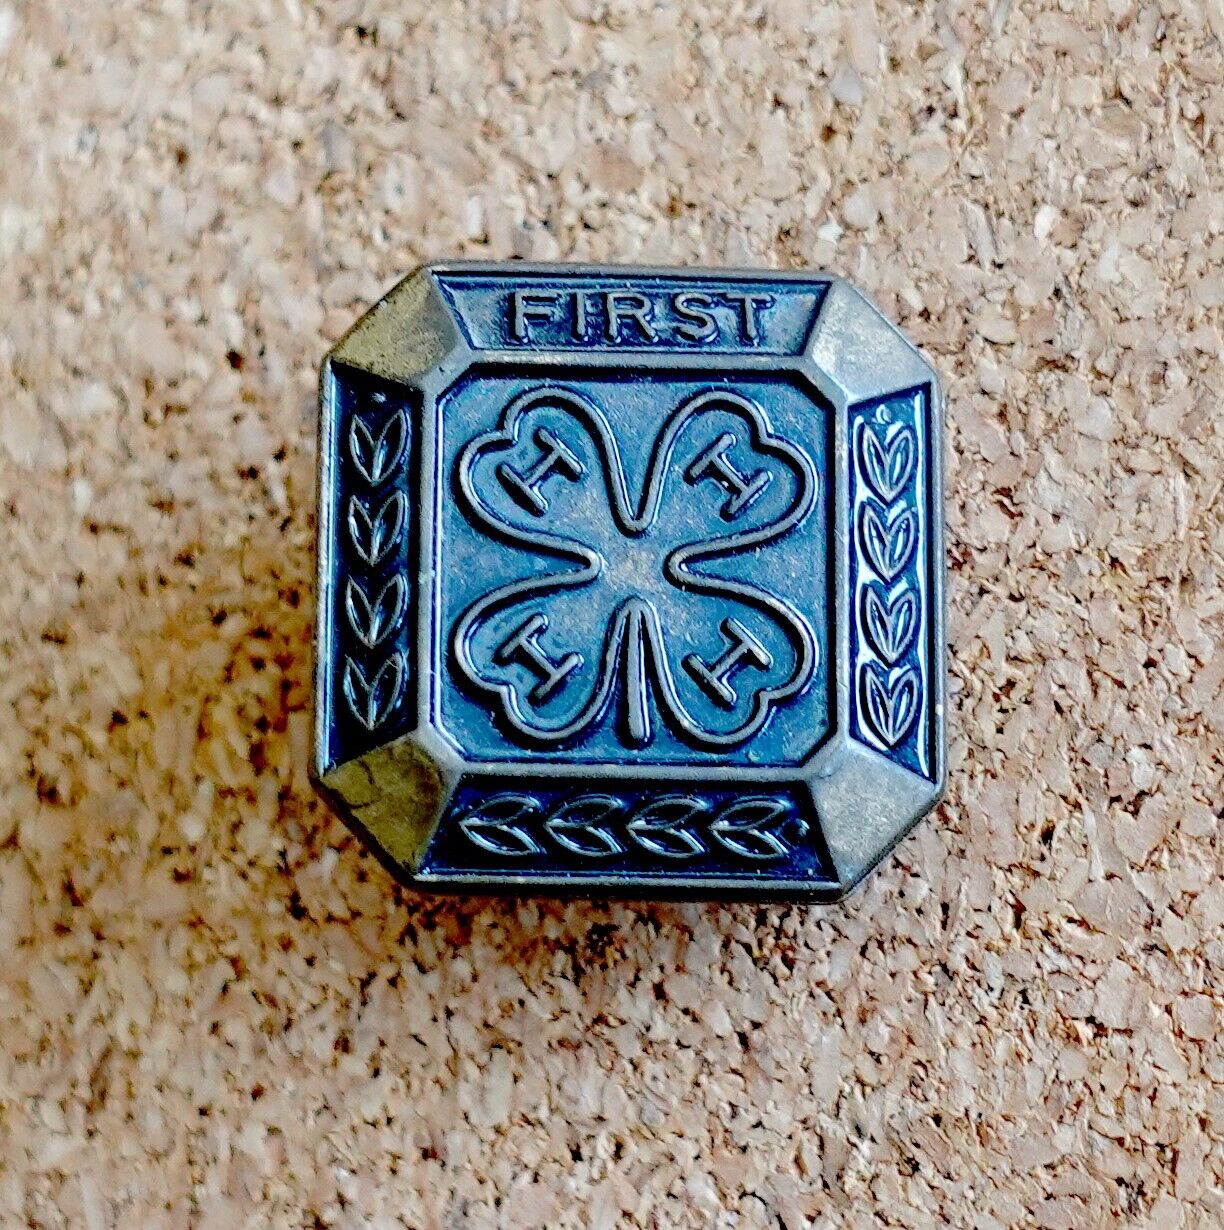 Vintage 4H Club First Year Lapel Pin Bronze Youth Organization